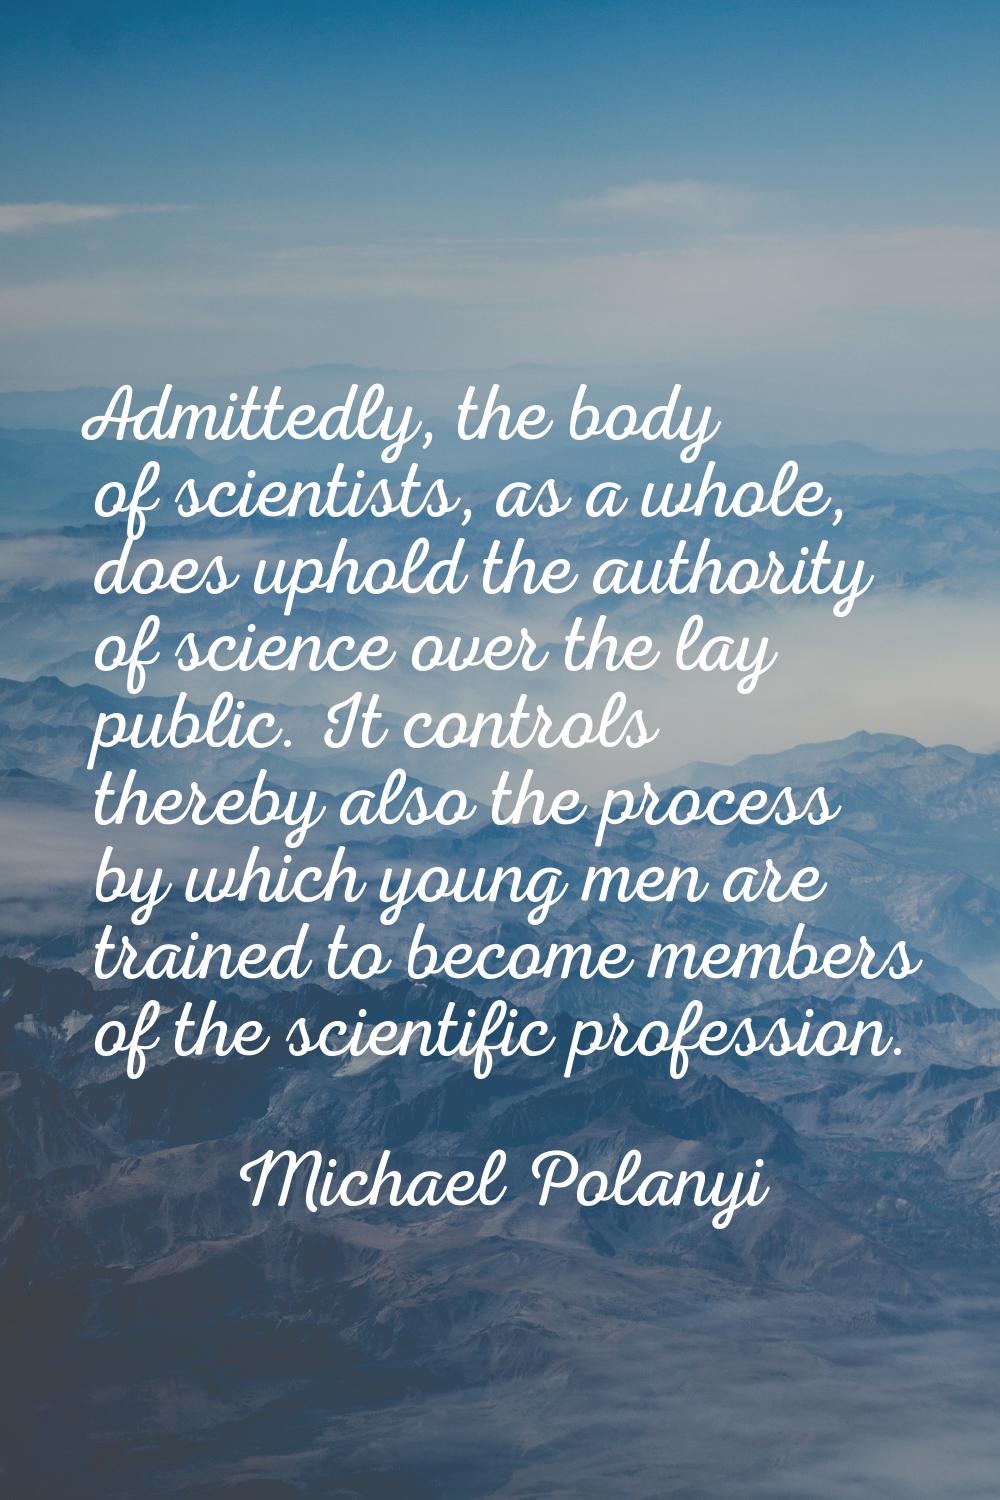 Admittedly, the body of scientists, as a whole, does uphold the authority of science over the lay p